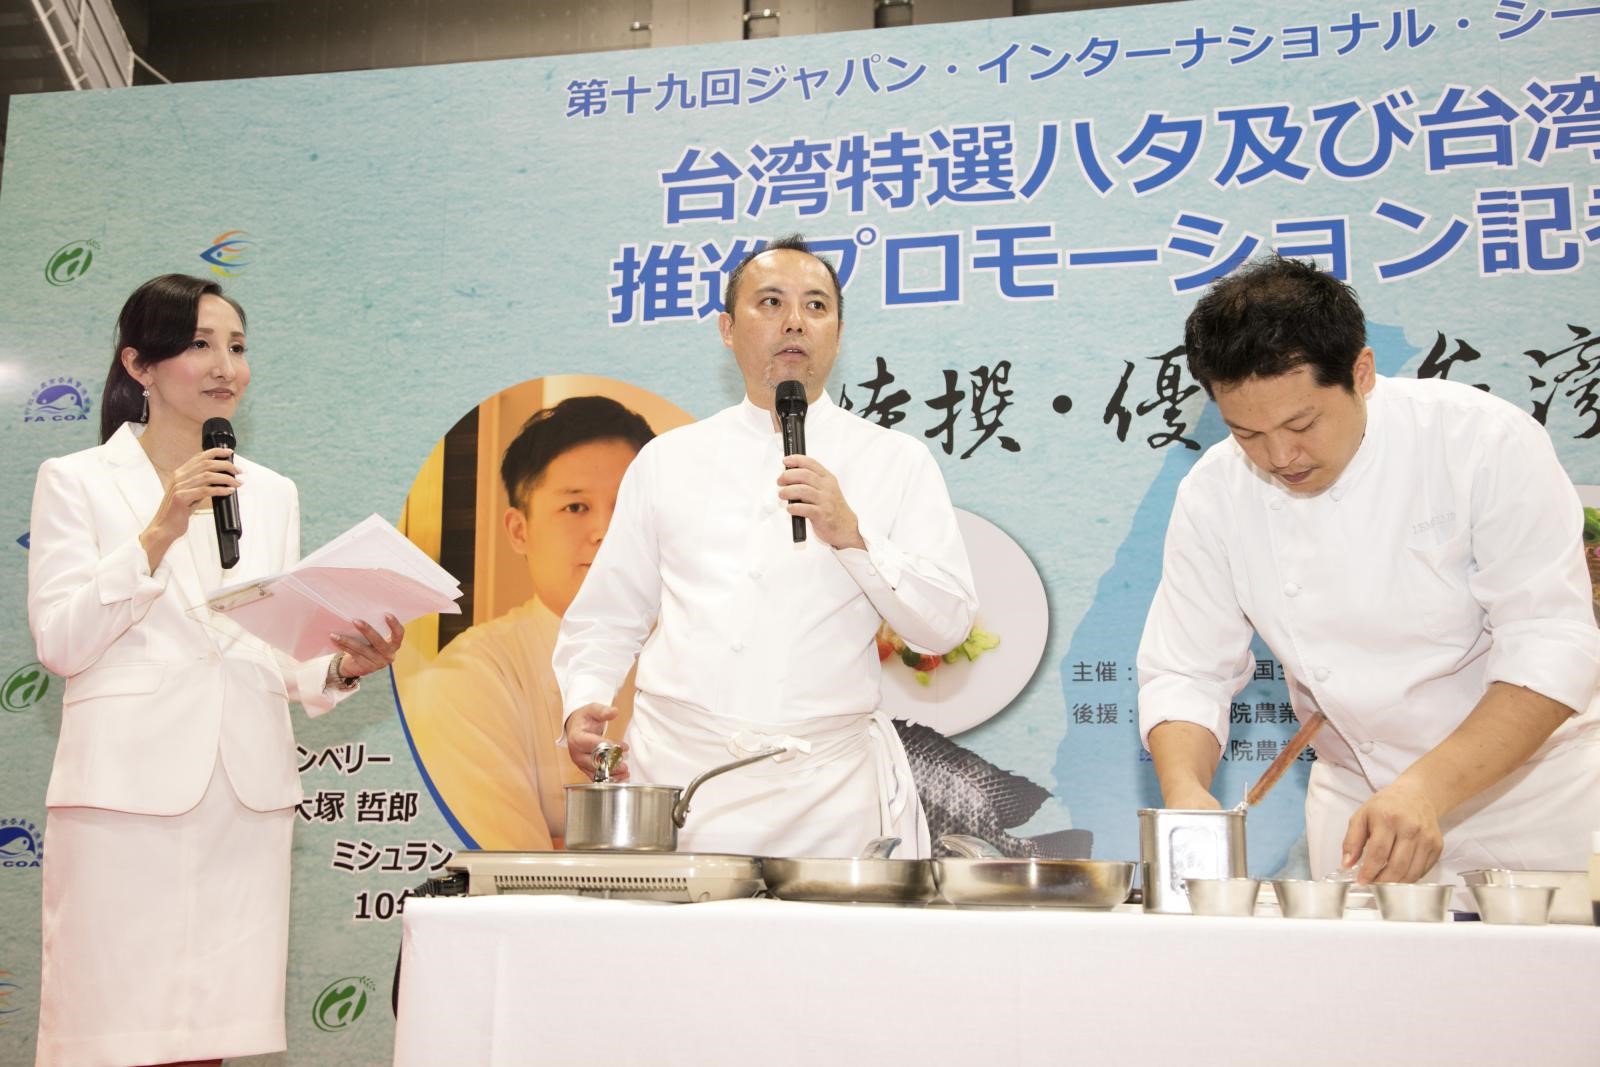  Endorsed by renowned Japanese chef Naoto Kishimoto, Taiwan's aquatic products seek to expand diverse marketing channels.